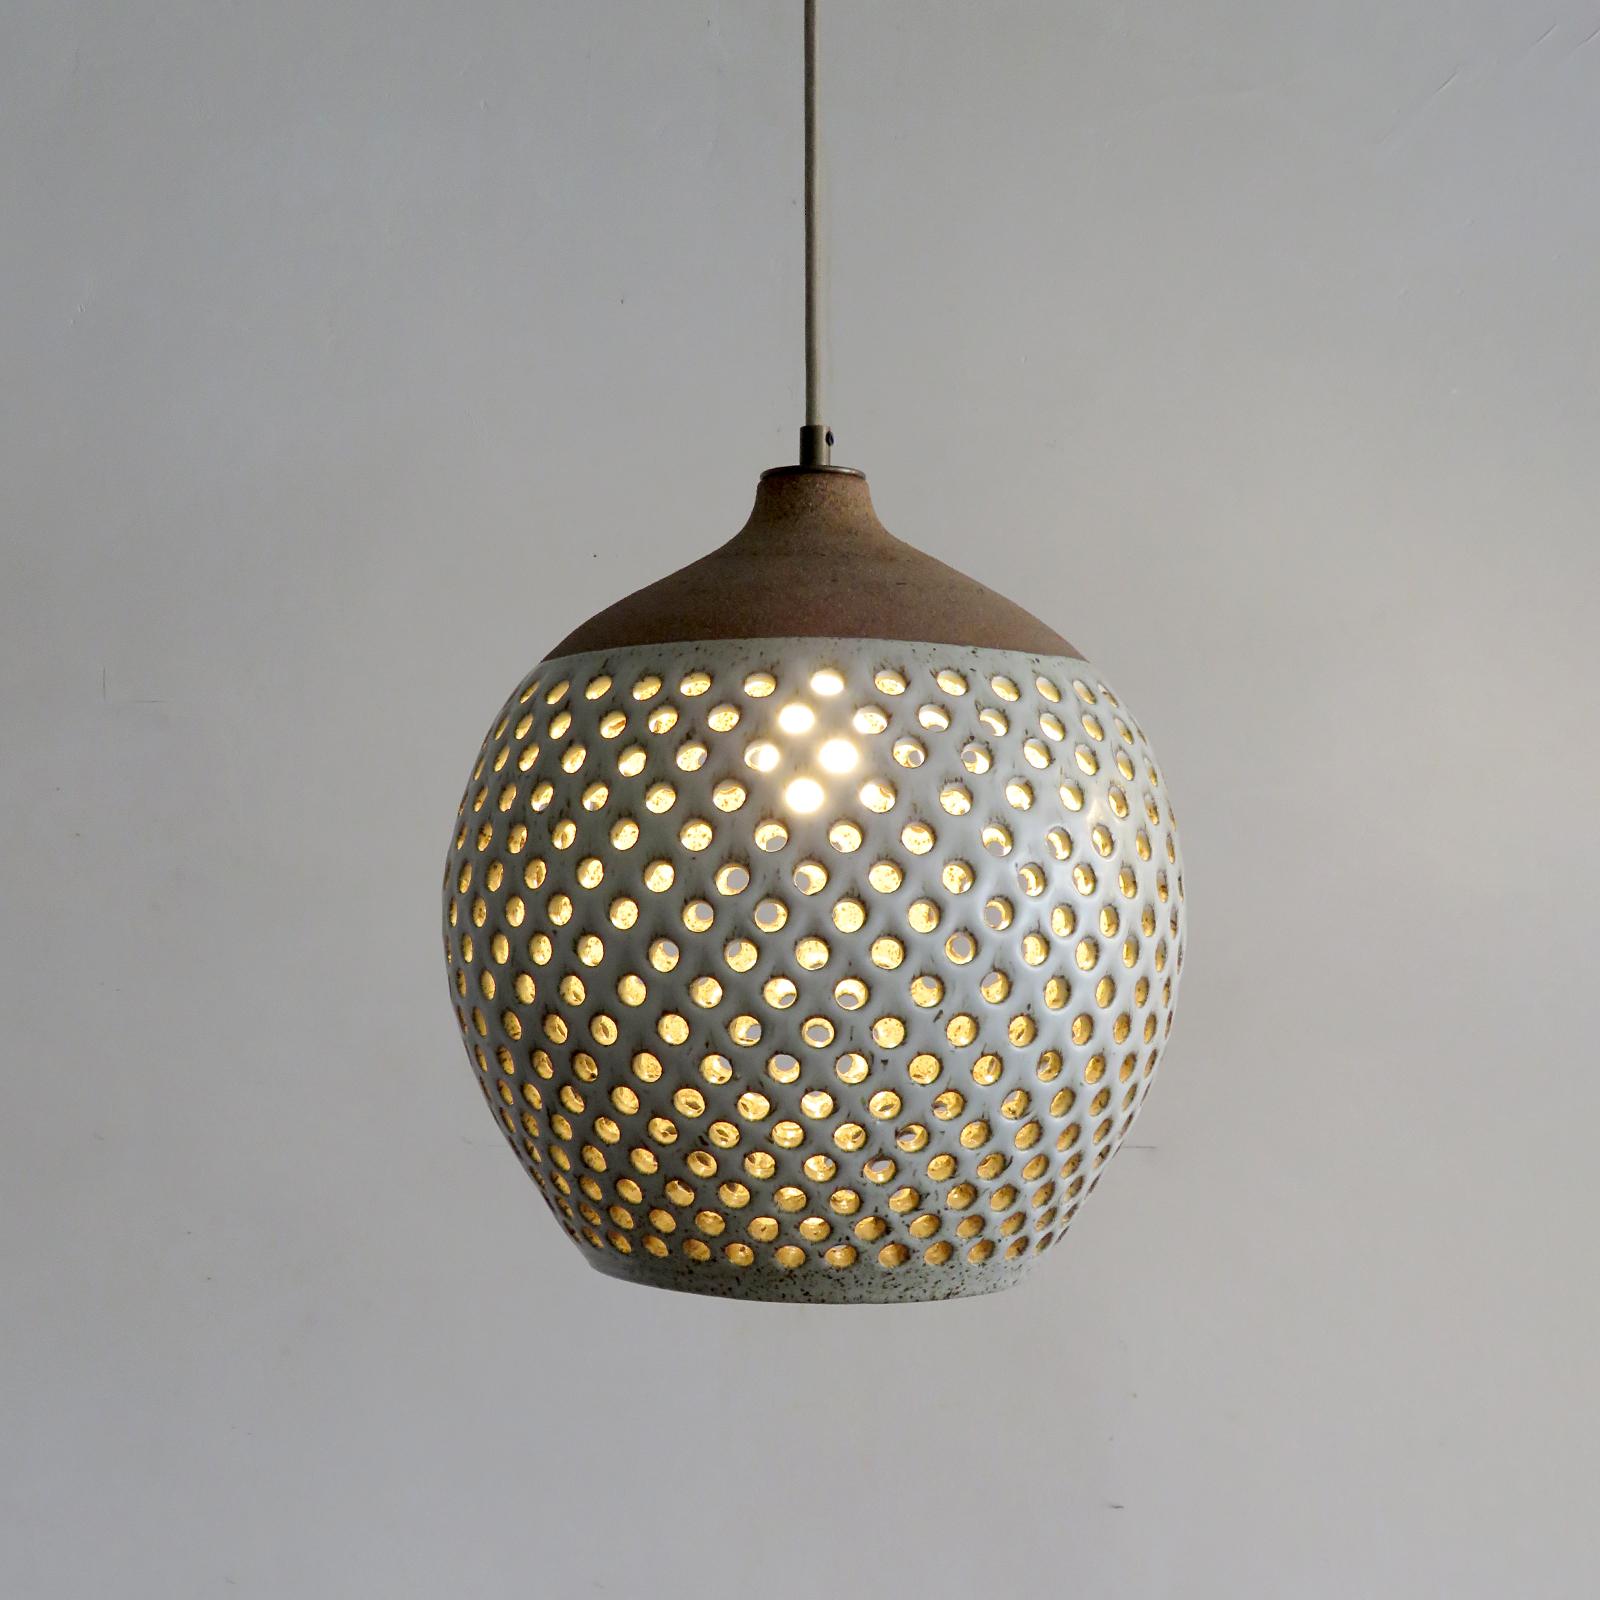 Ceramic Pendant Light No. L51 by Heather Levine In New Condition For Sale In Los Angeles, CA